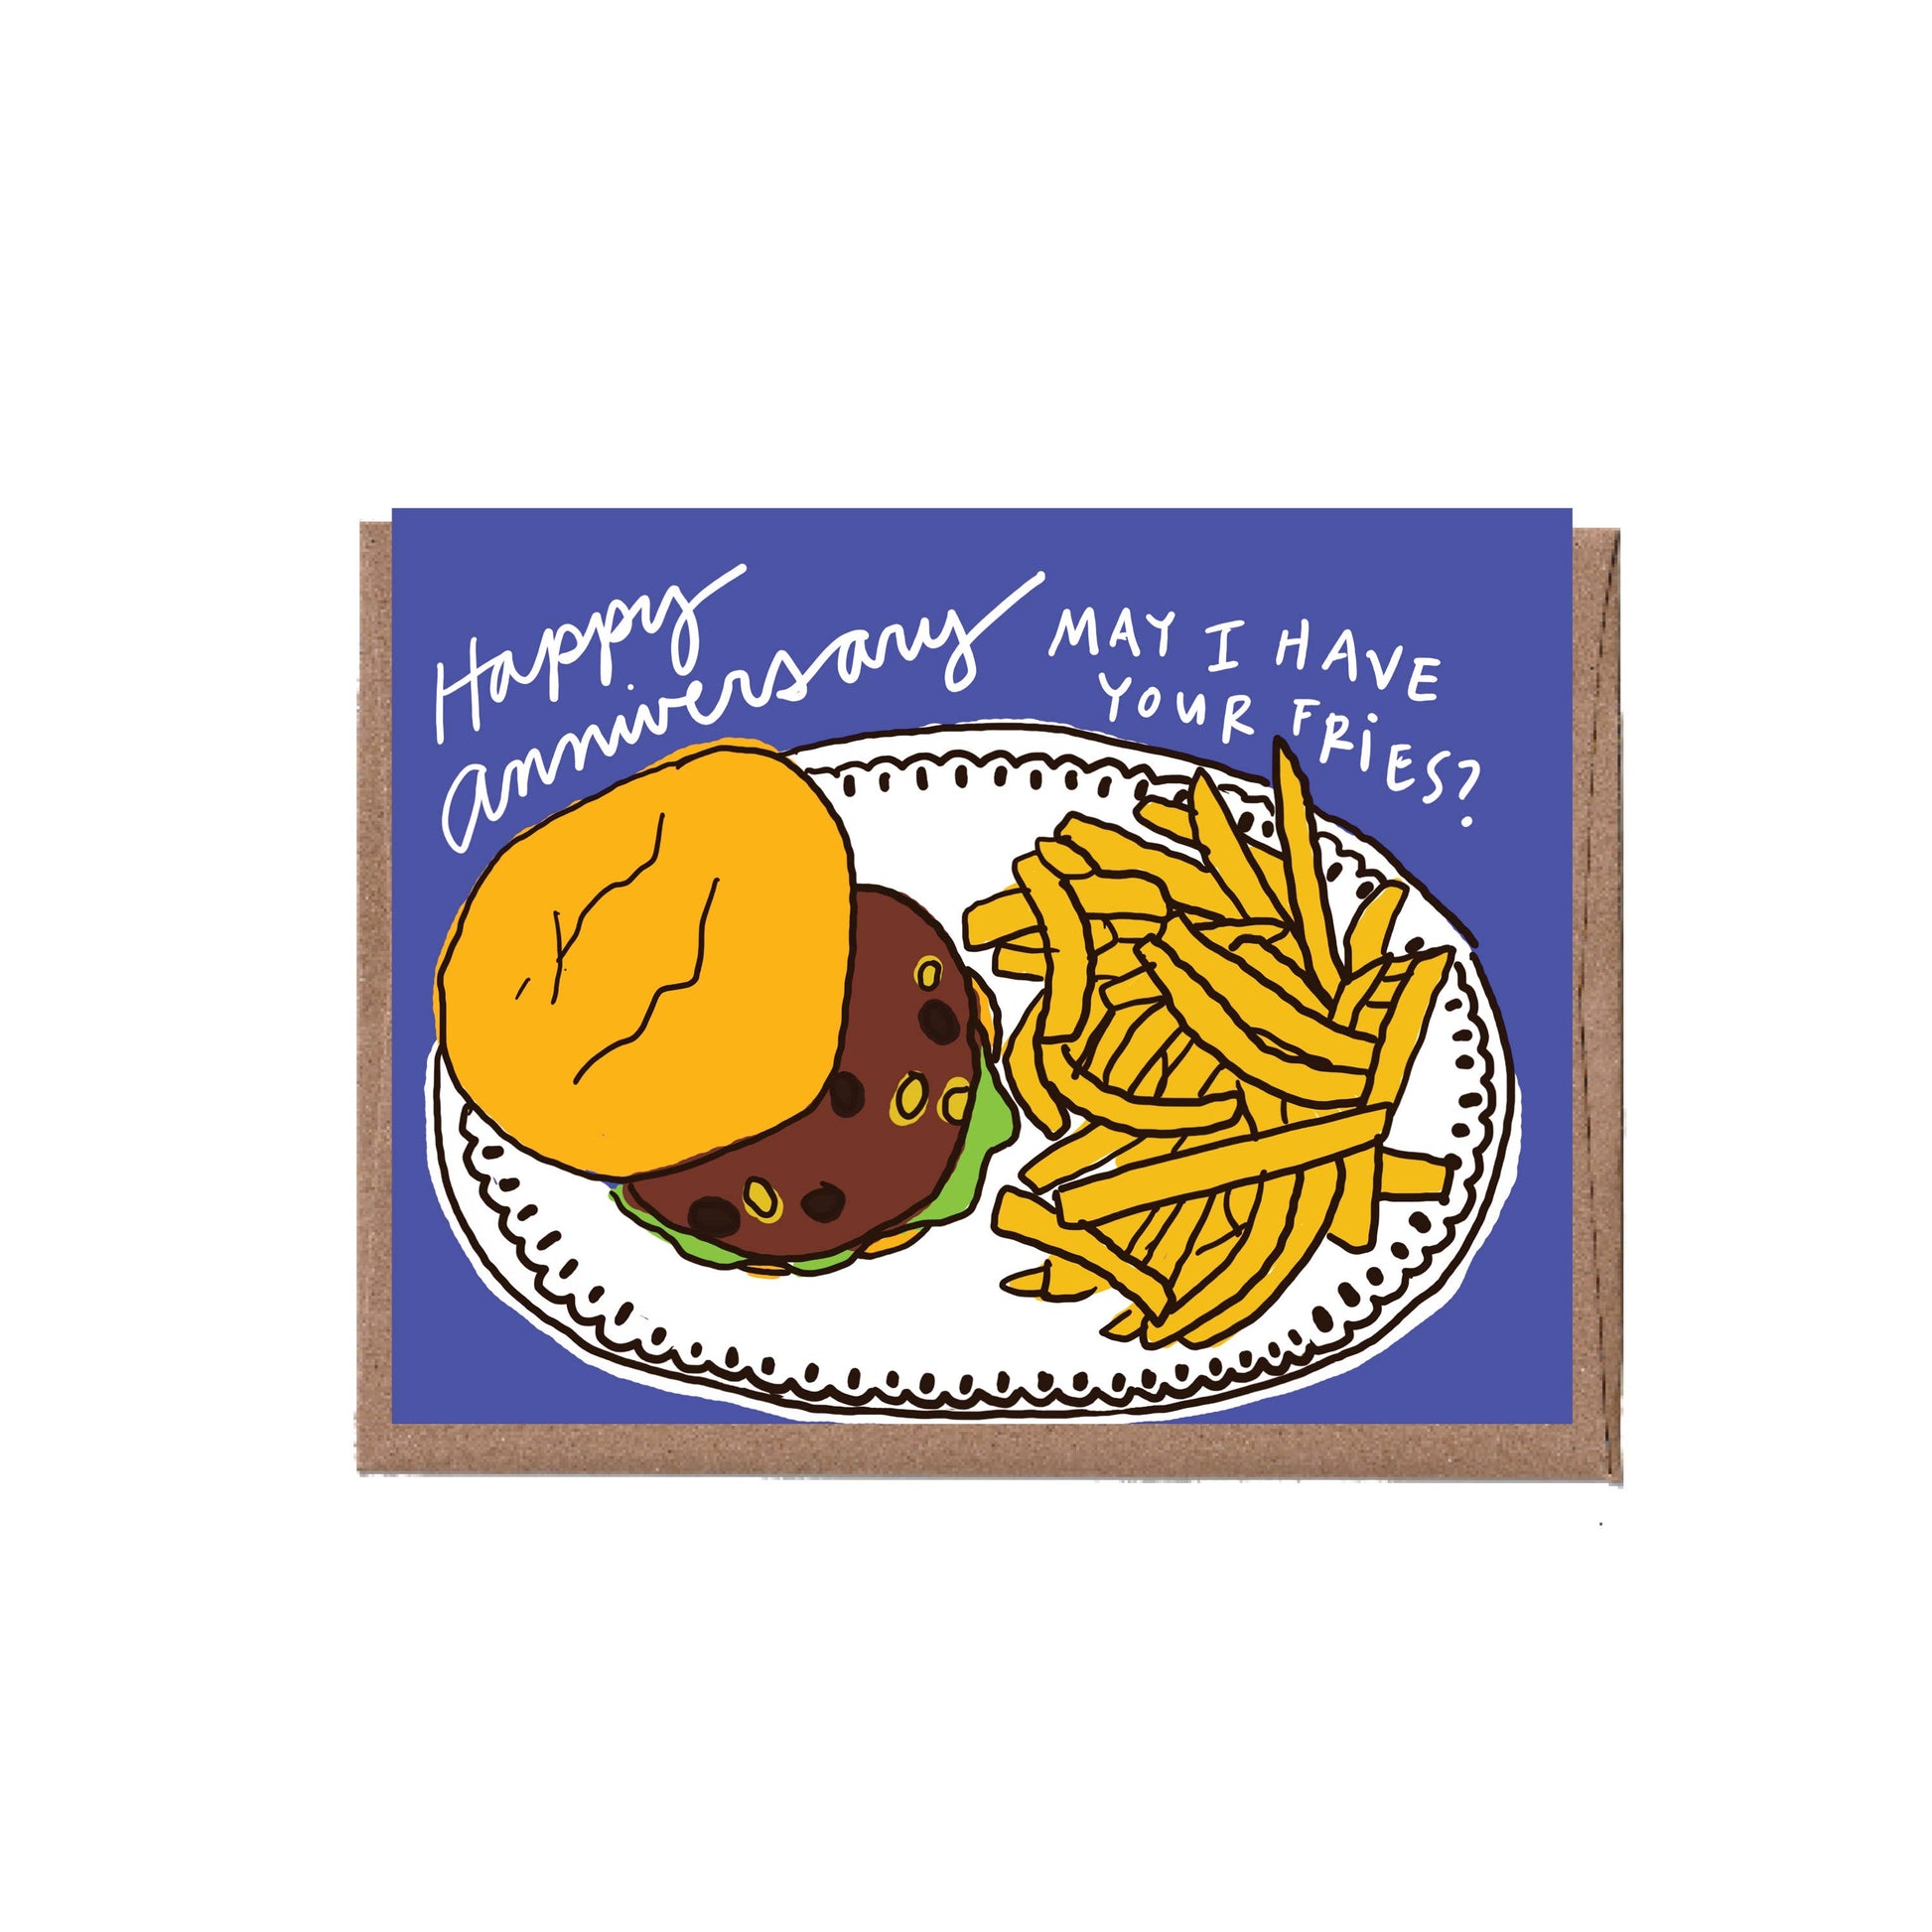 Greeting card with text "Happy Anniversary... May I have your fries?" and illustration of burger and fries on frilly white plate with blue background.